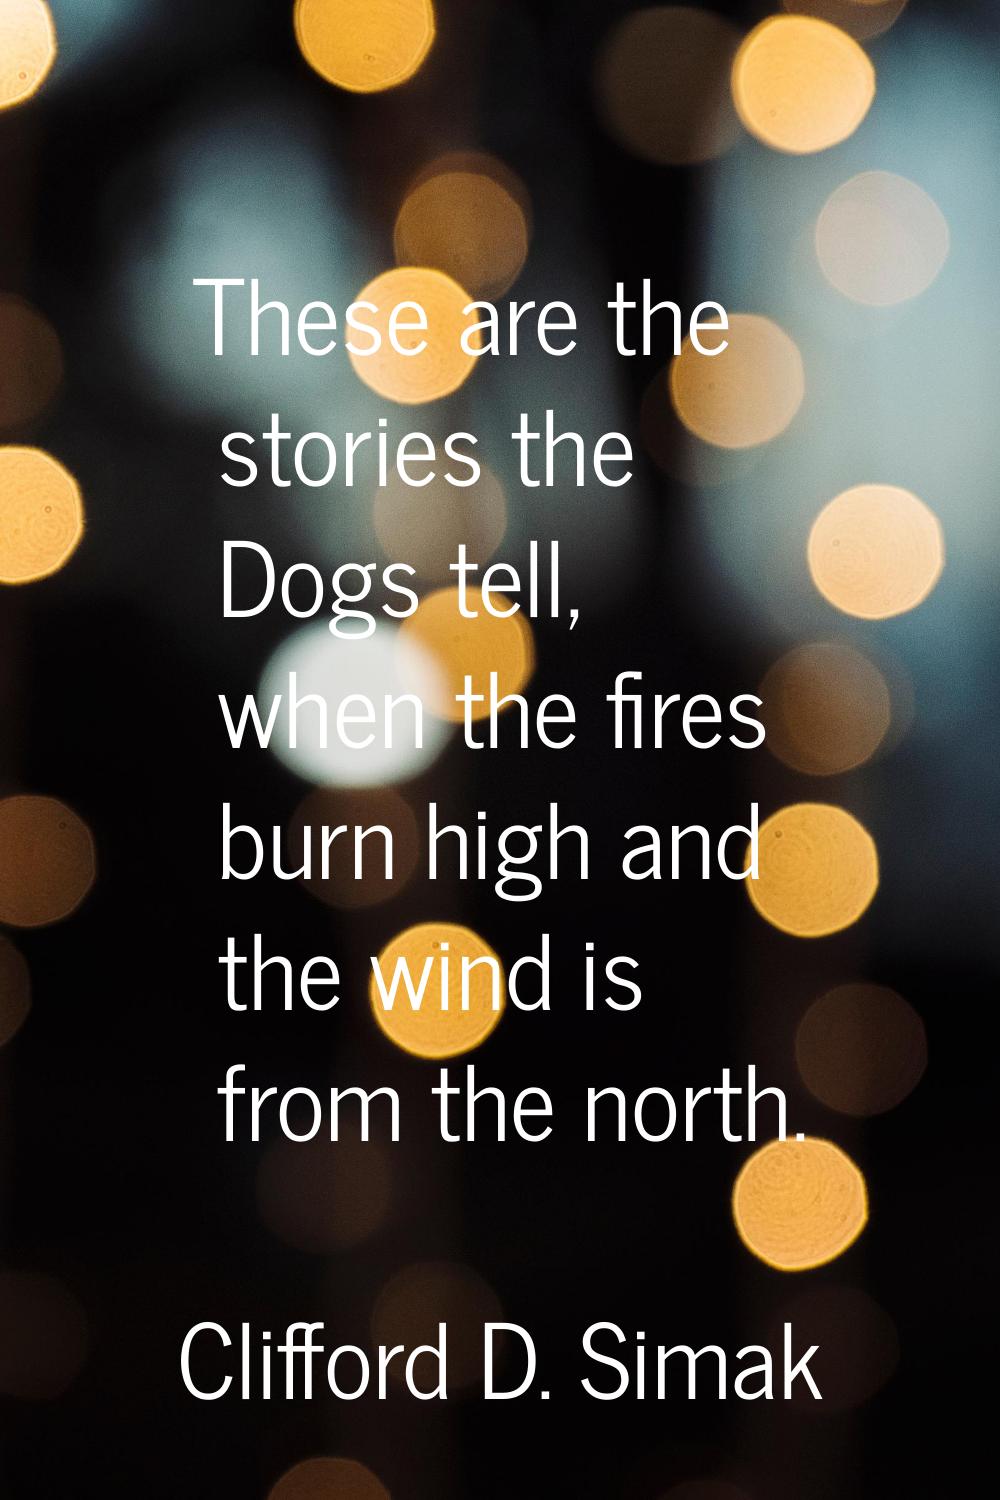 These are the stories the Dogs tell, when the fires burn high and the wind is from the north.